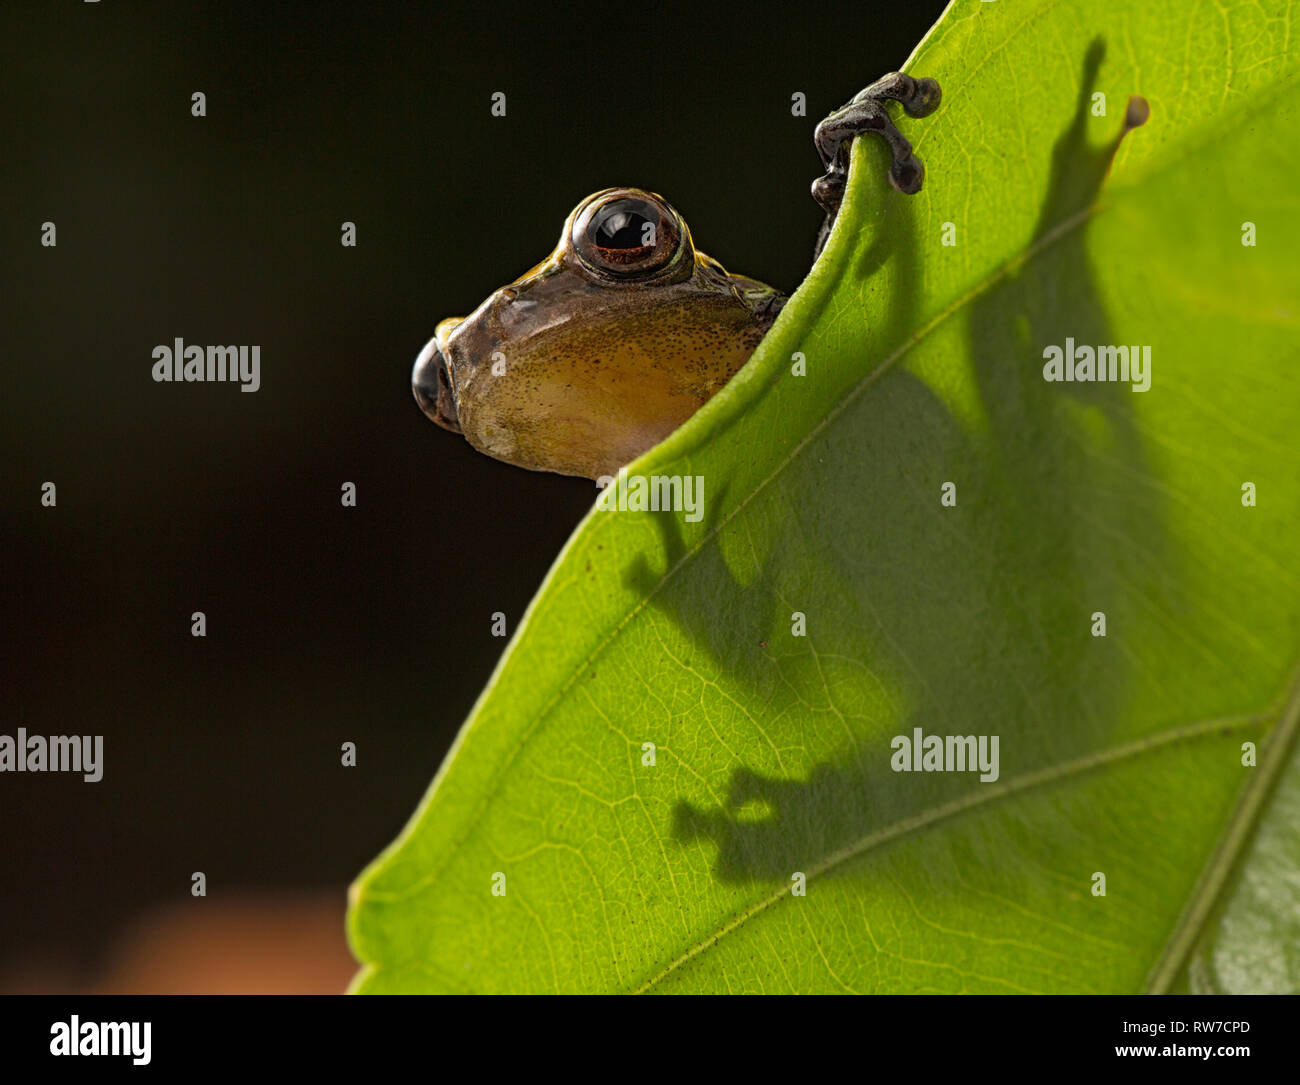 Curious little frog peeping over edge of leaf. Dendropsophus manonegra an amphibian species of the Amazon rain forest of Colombia Brazil and Ecuador,  Stock Photo